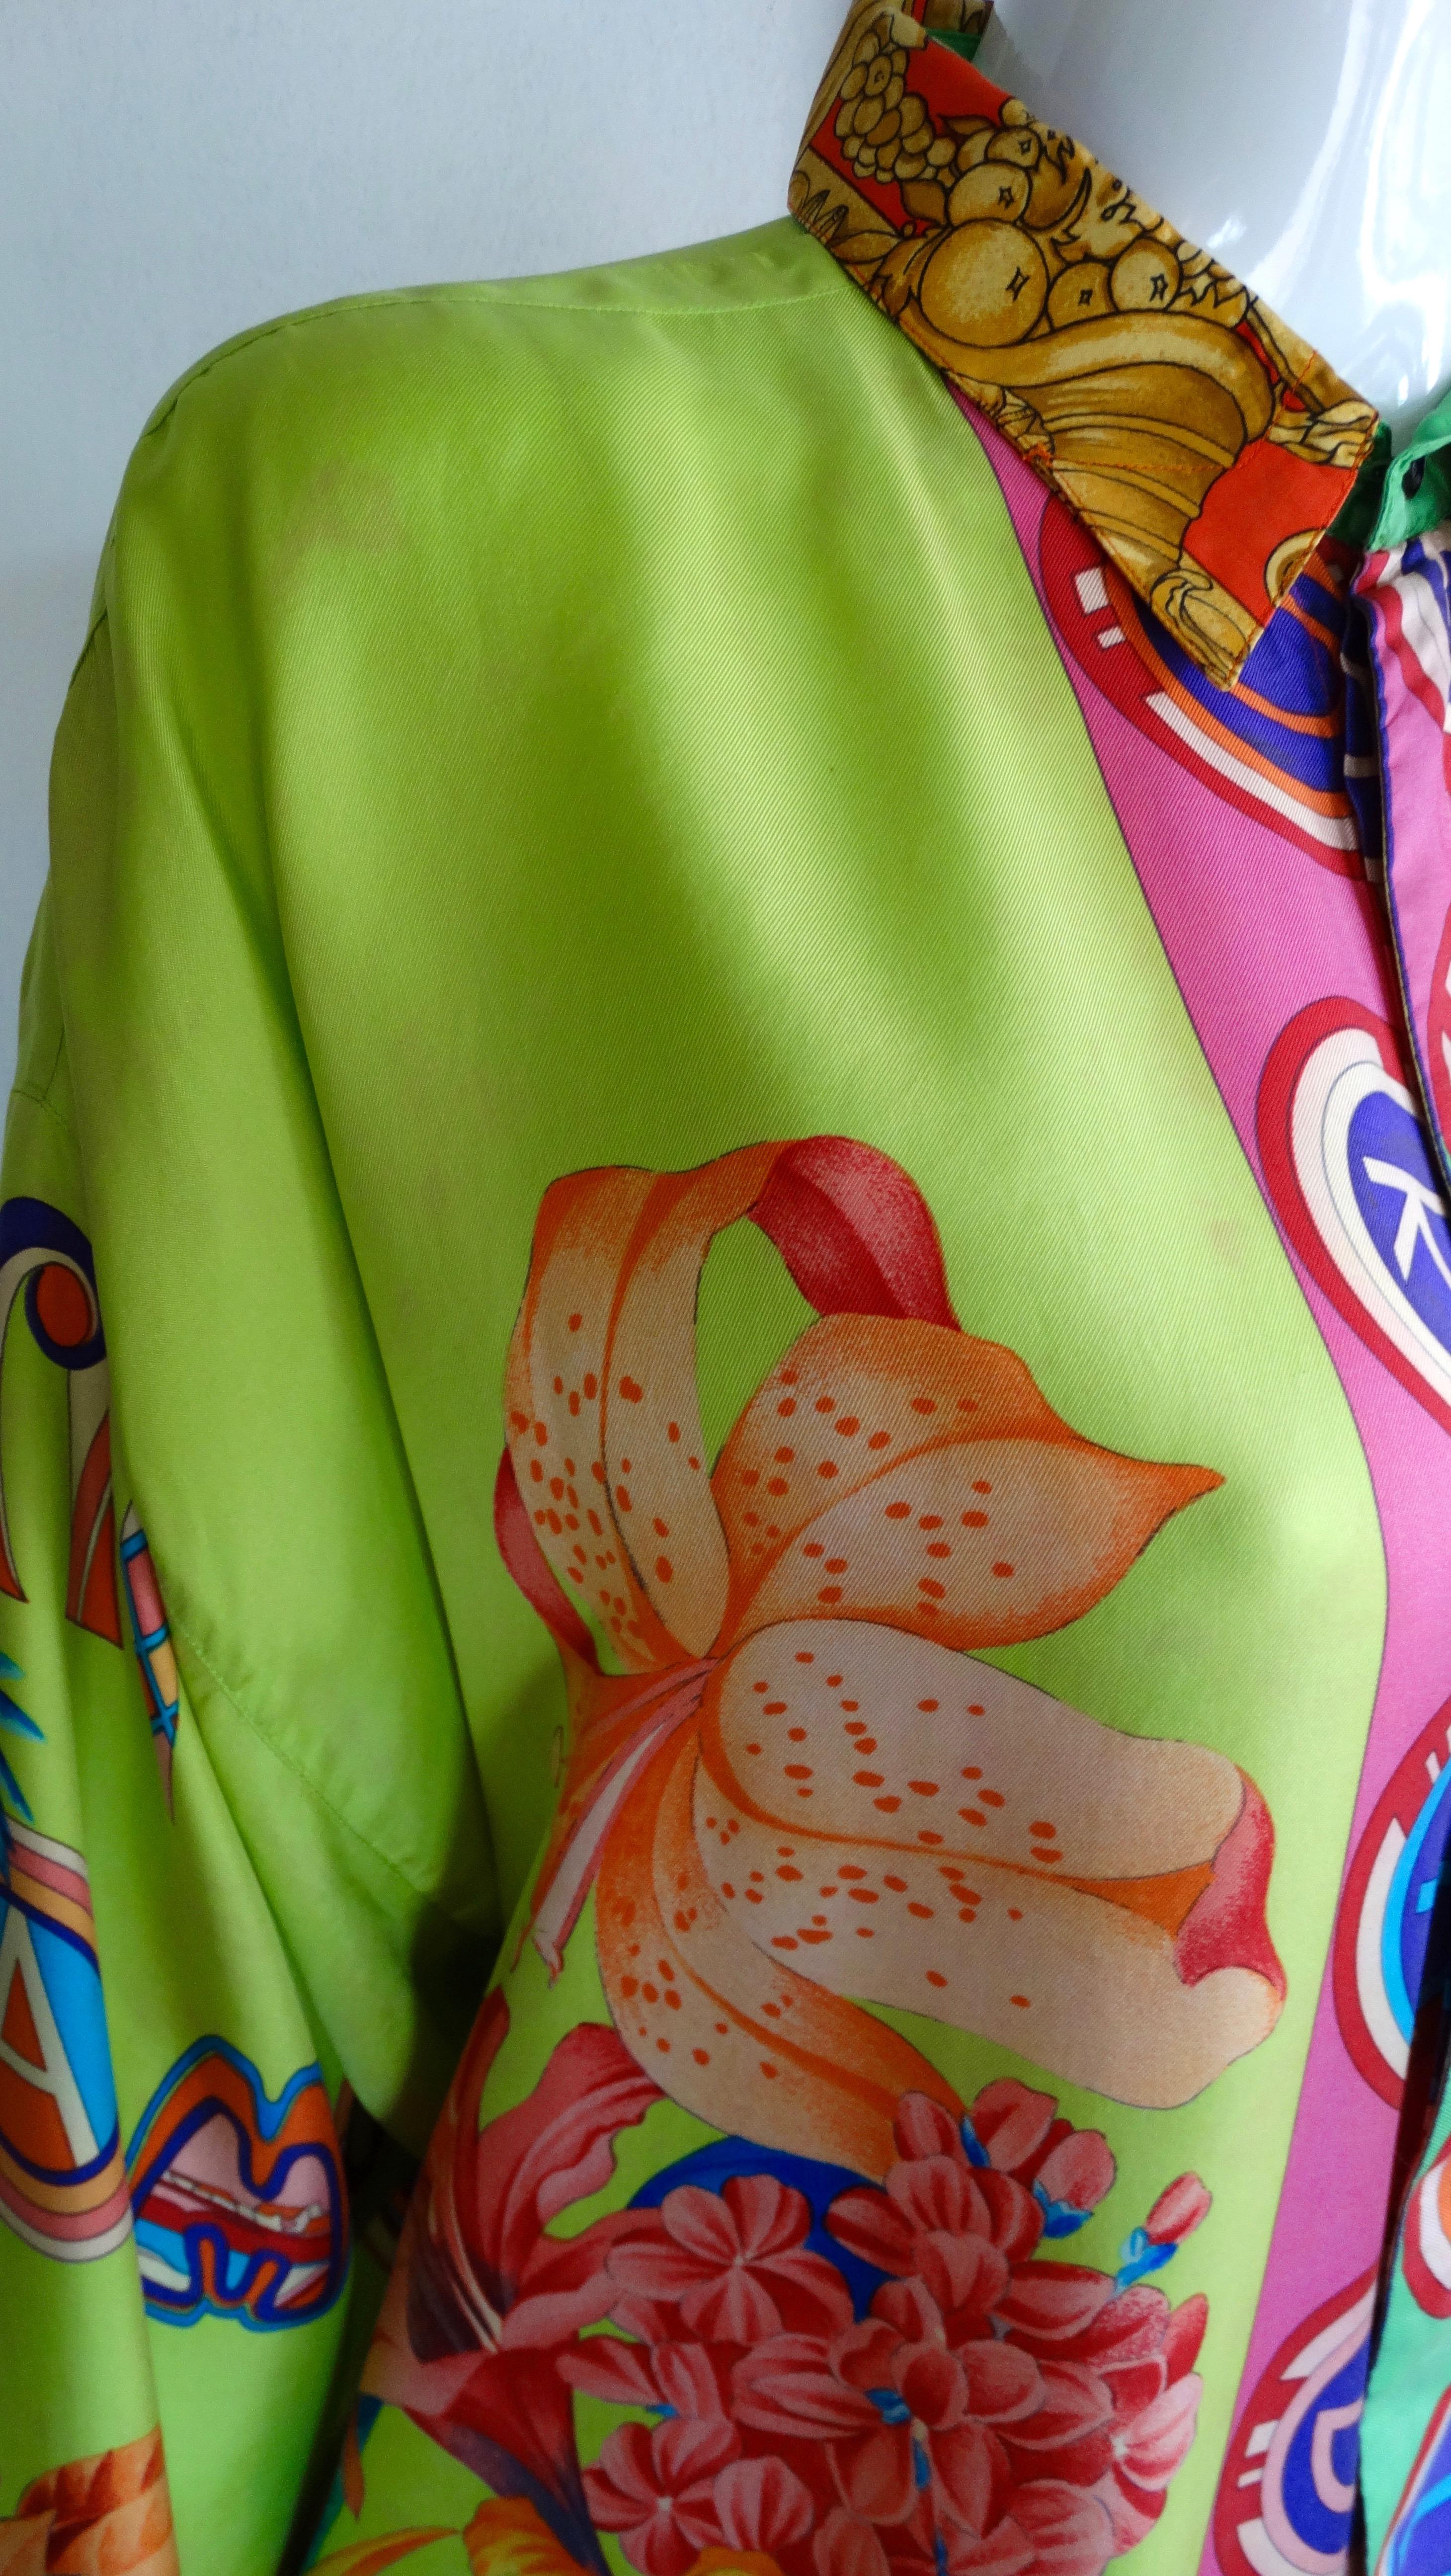 Gianna Versace straight from the Versace archives! Circa 1990s, this silk shirt features a Miami inspired print with bright neon colors, various tropicana floral arrangements, and decorative fonts spelling out 